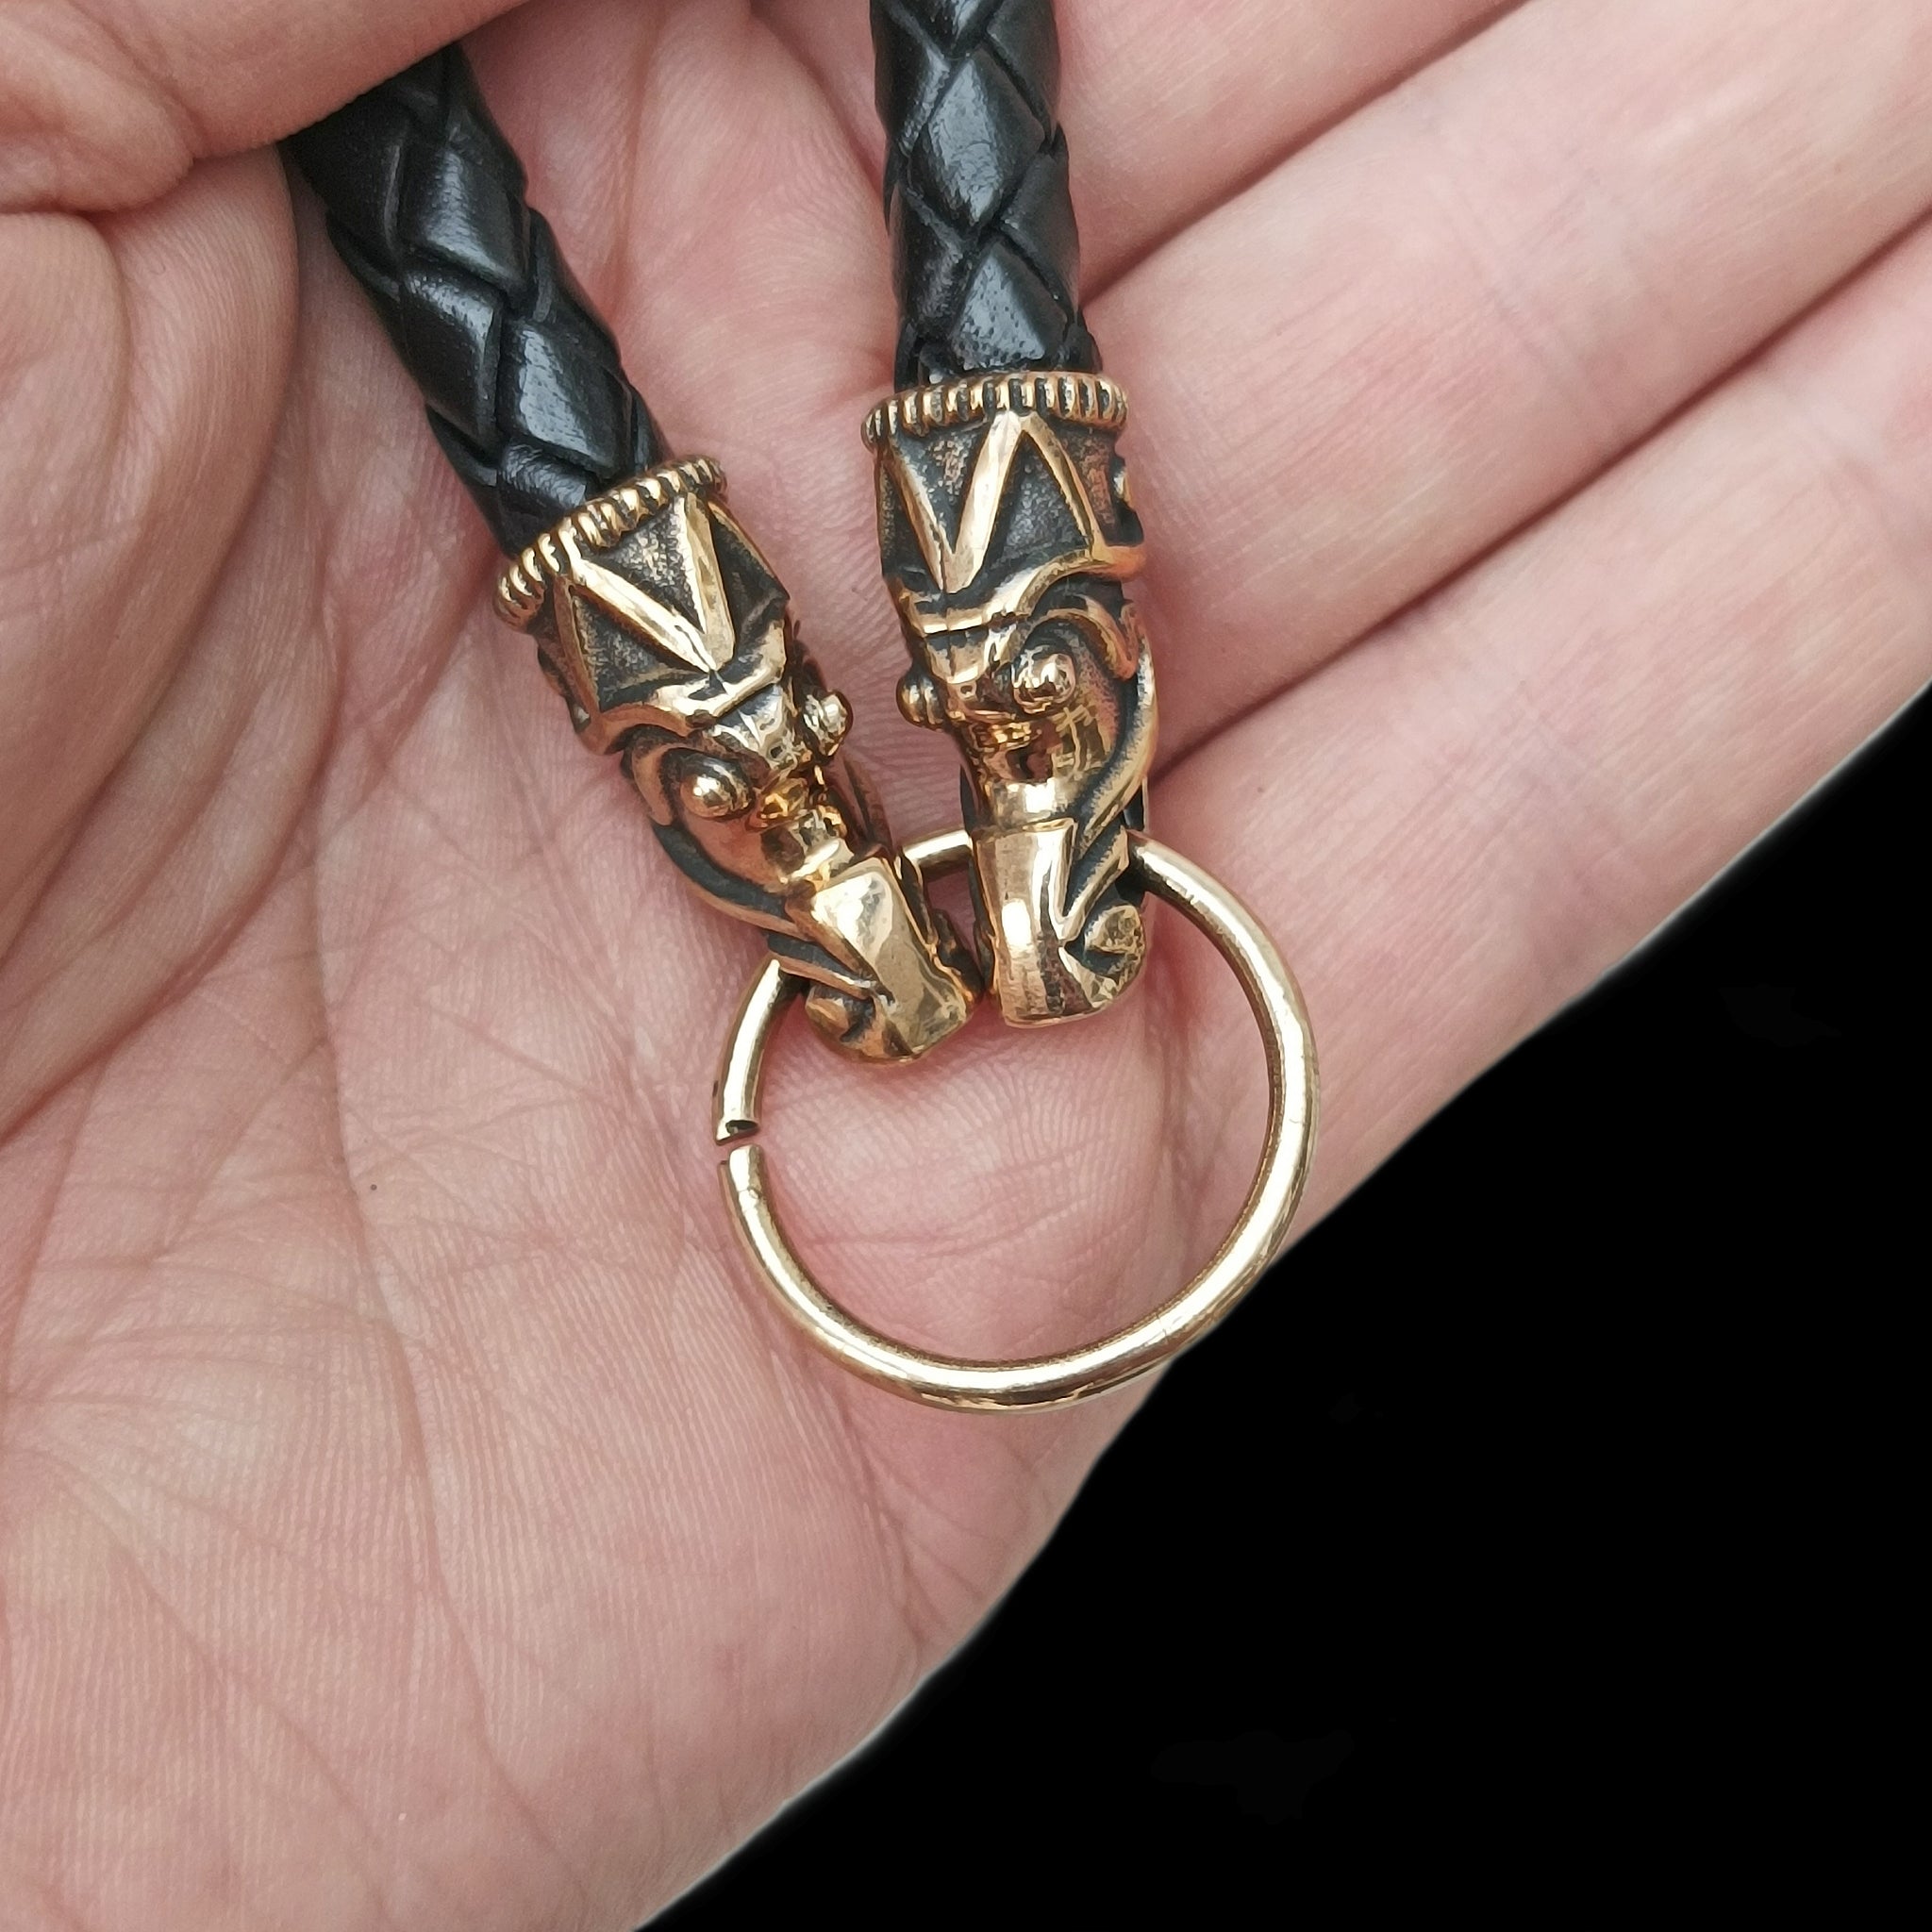 8mm Width Braided Leather Necklace with Bronze Gotlandic Dragon Heads and Splt Ring in Hand